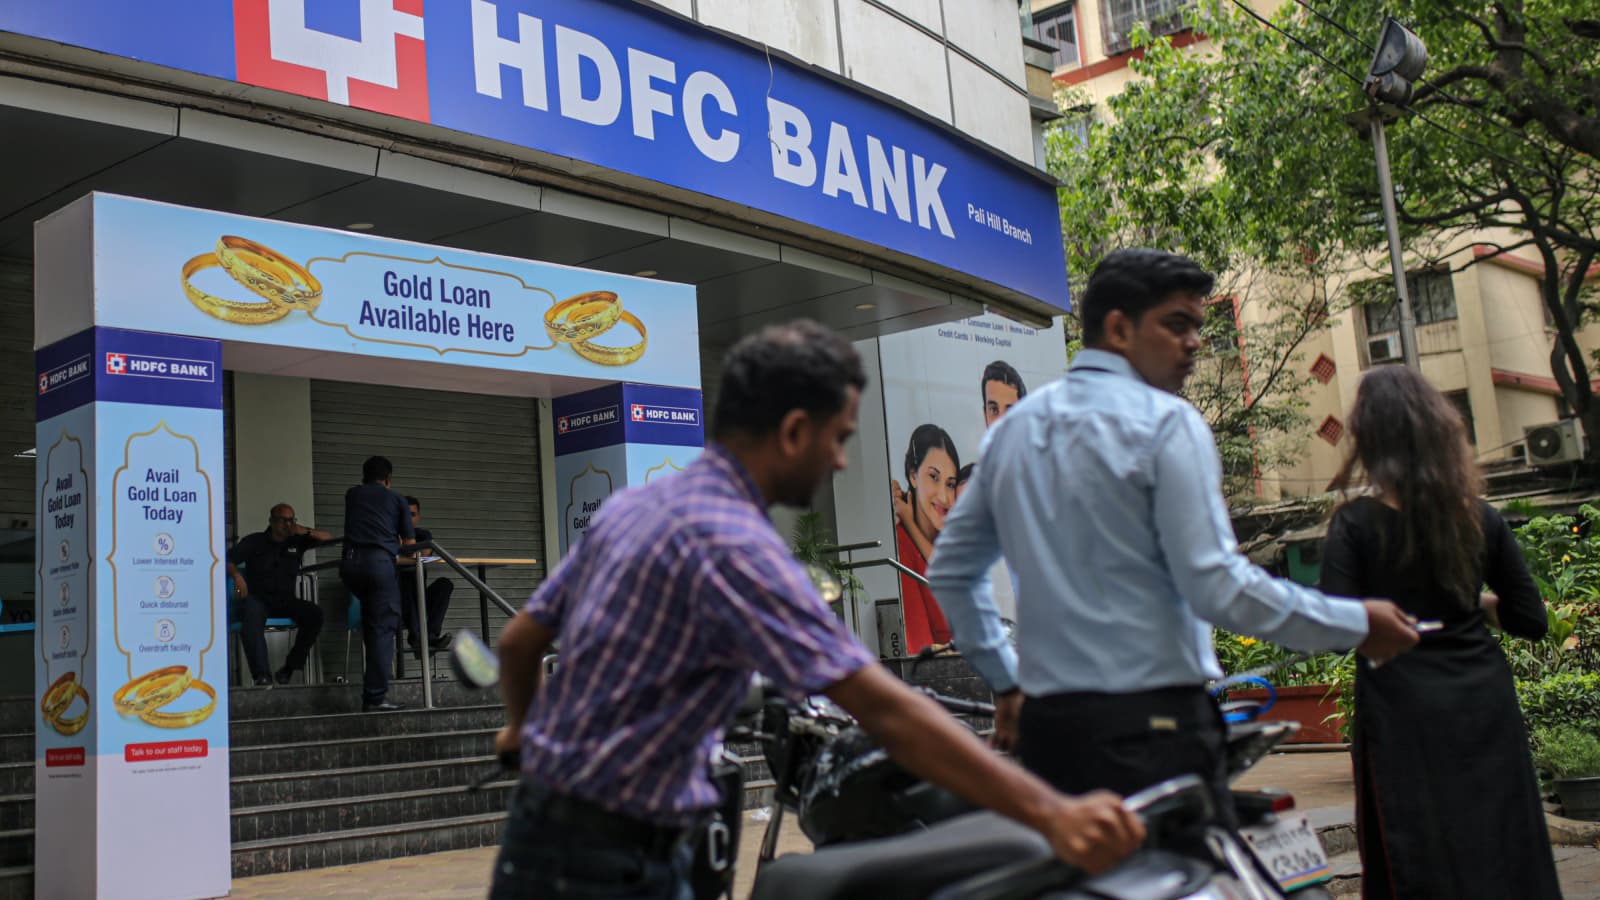 Which bank is fast growing in India?